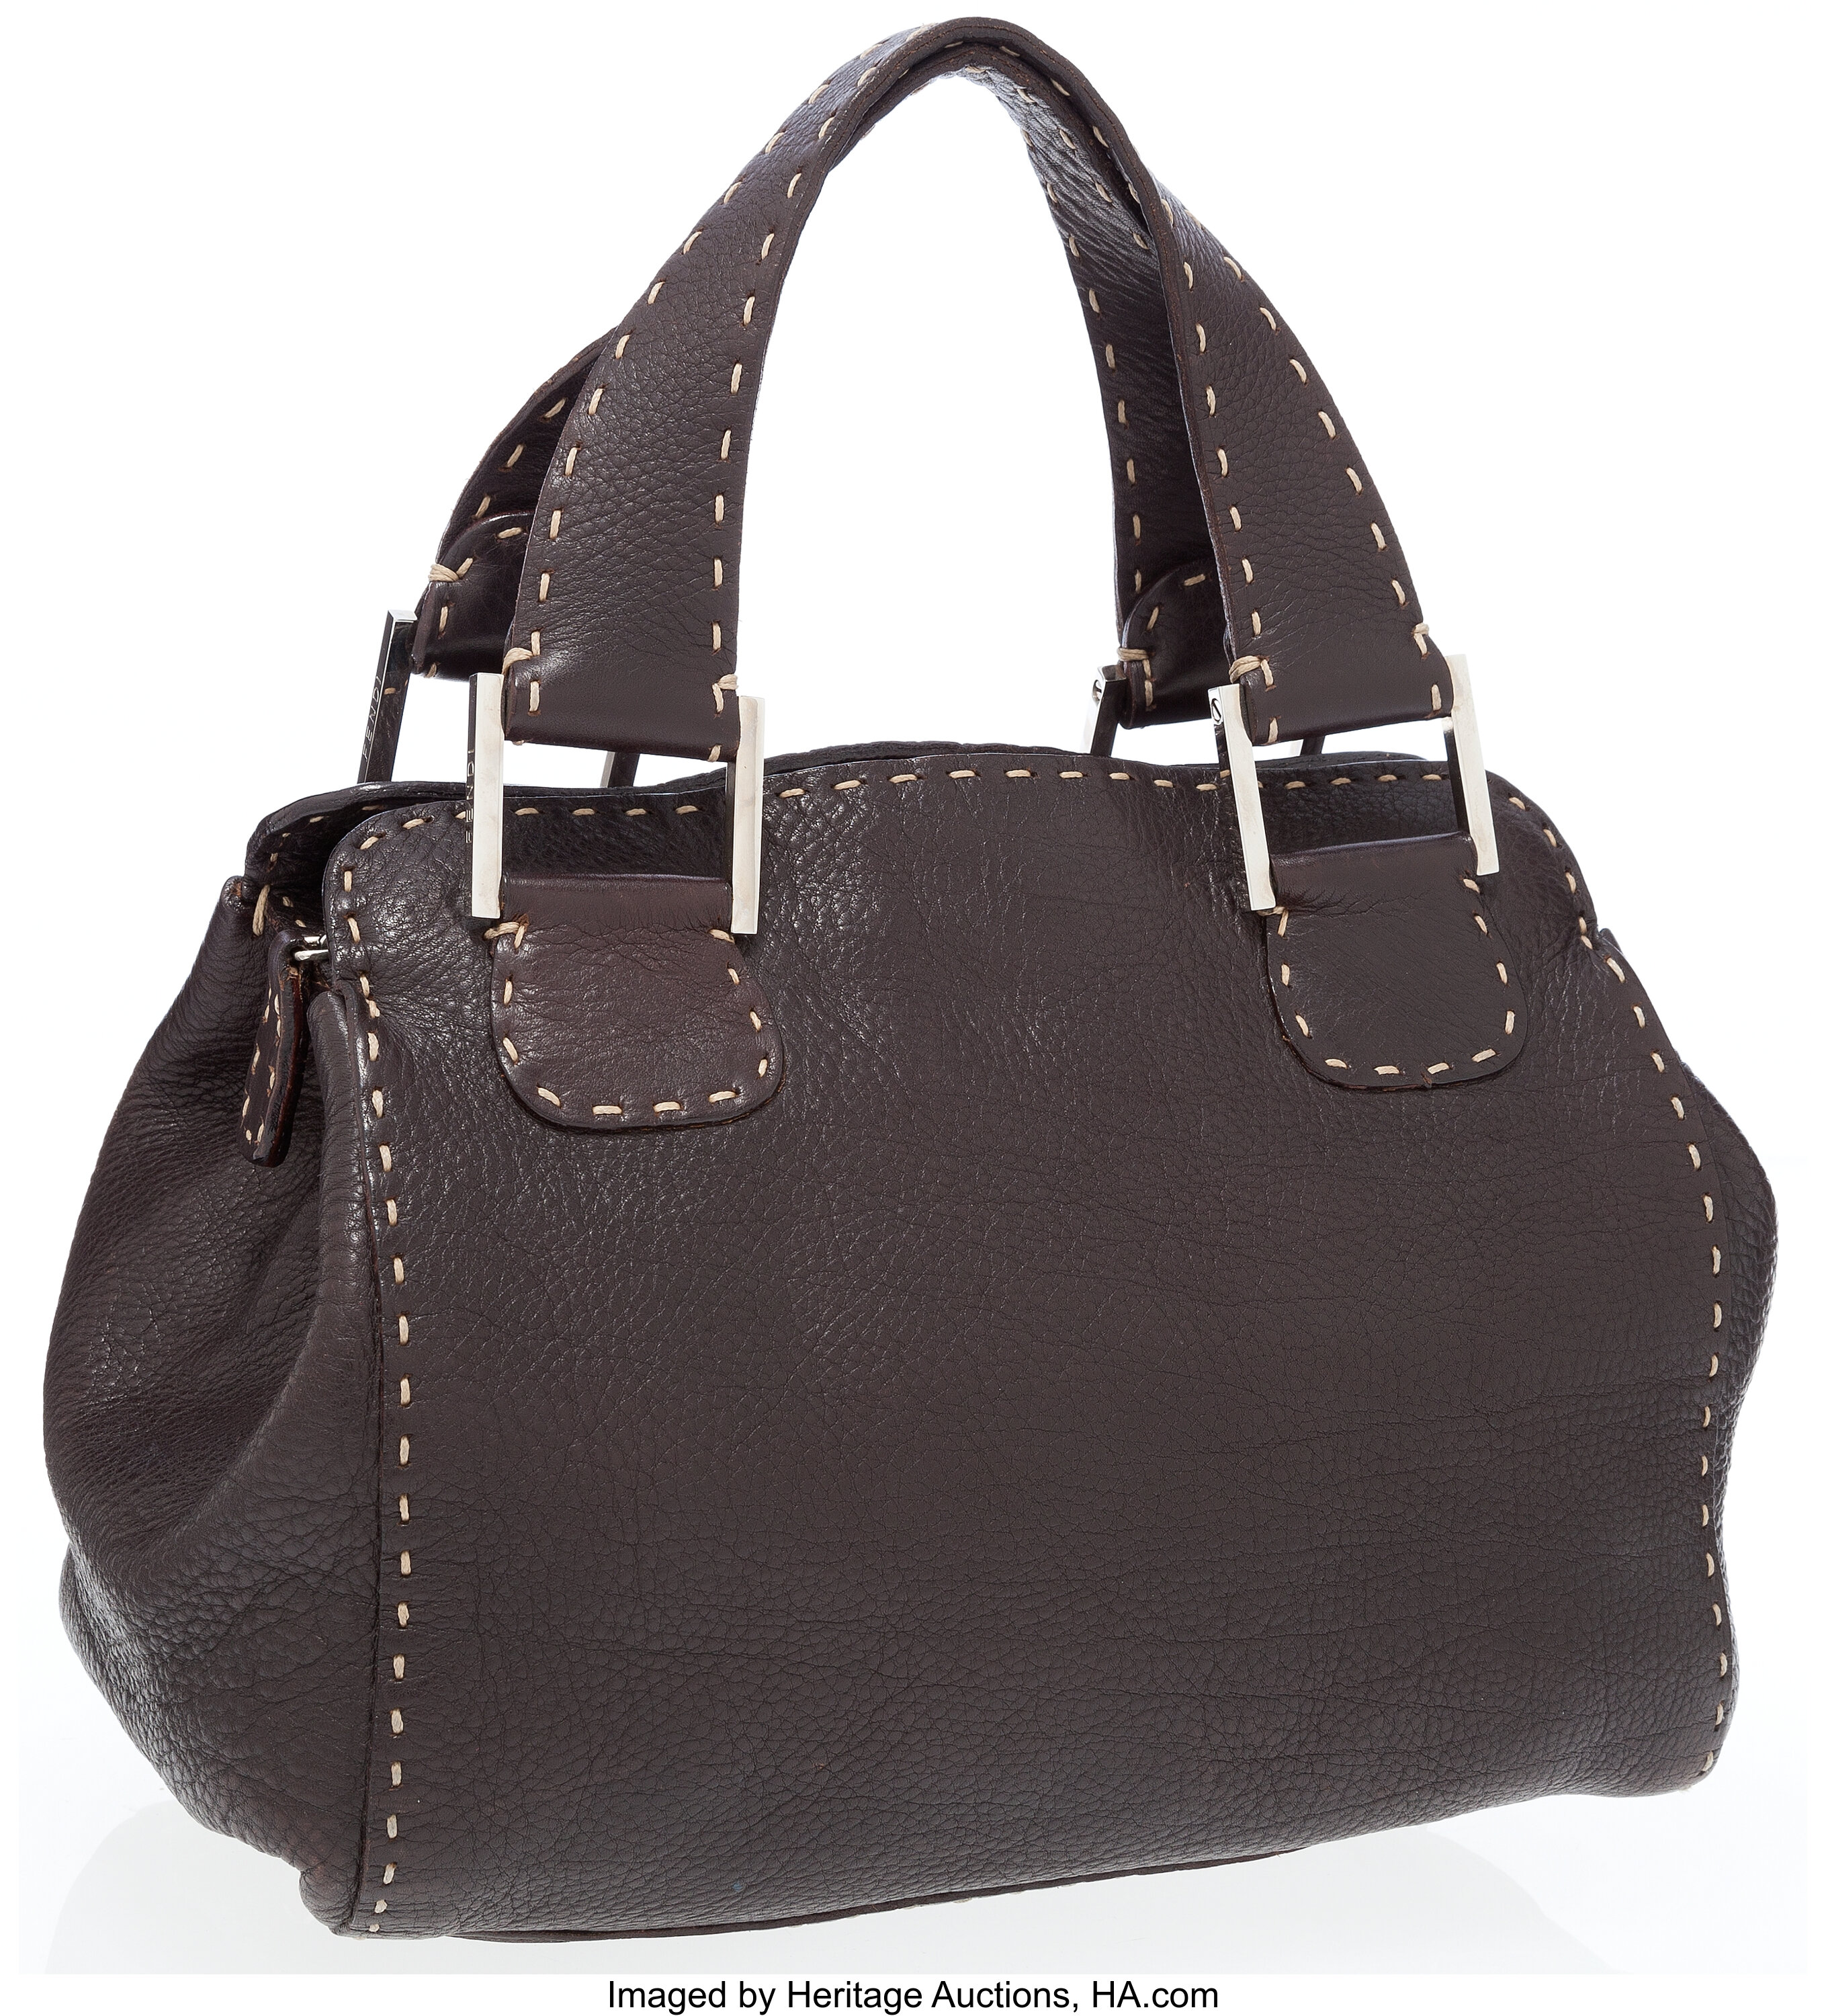 Heritage Collection Physician Style Bag